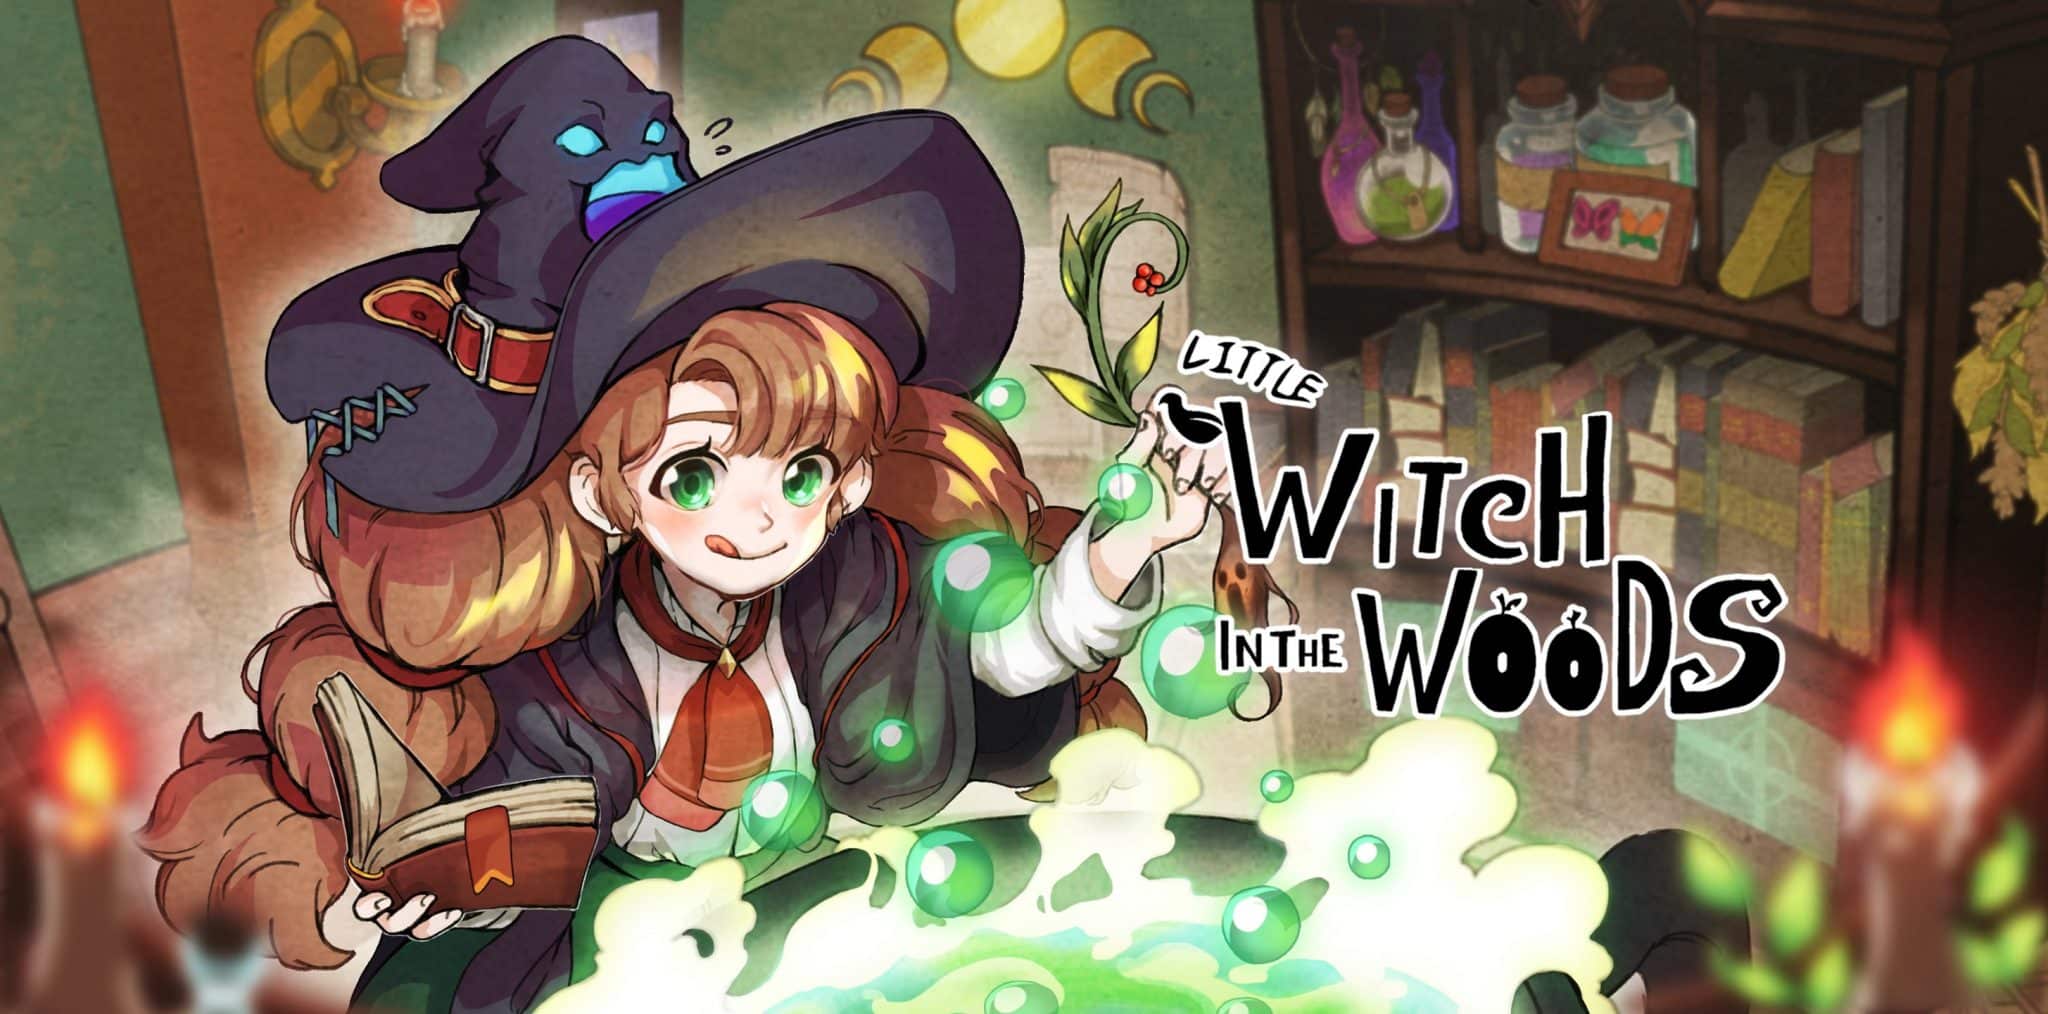 Little Witch in the Woods